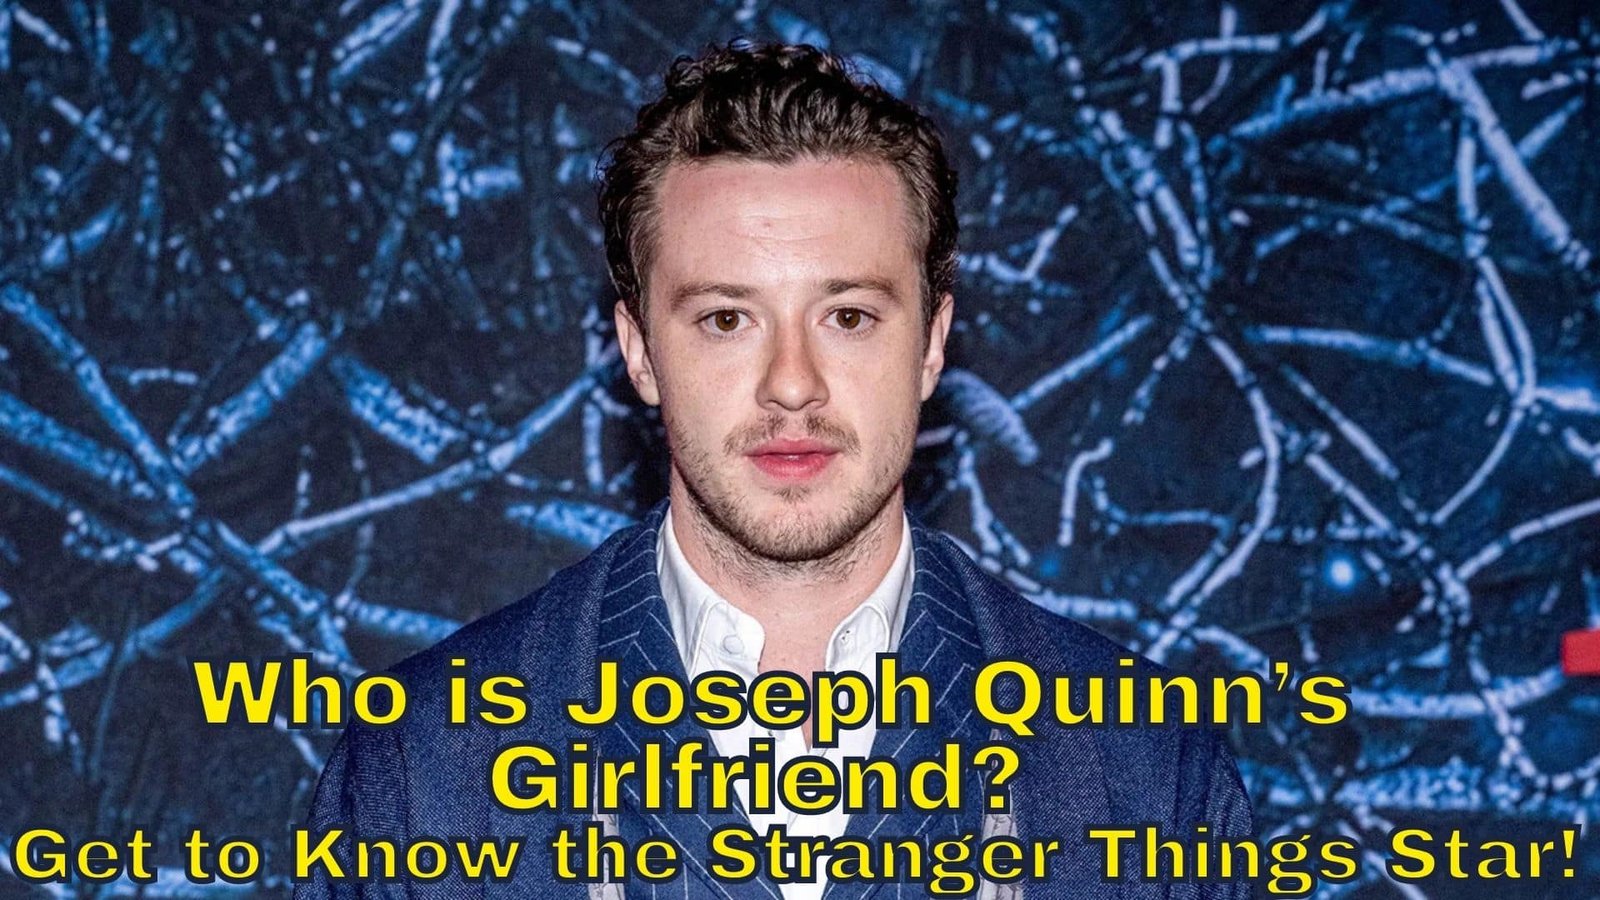 Who is Joseph Quinn’s Girlfriend? - Get to Know the Stranger Things Star!